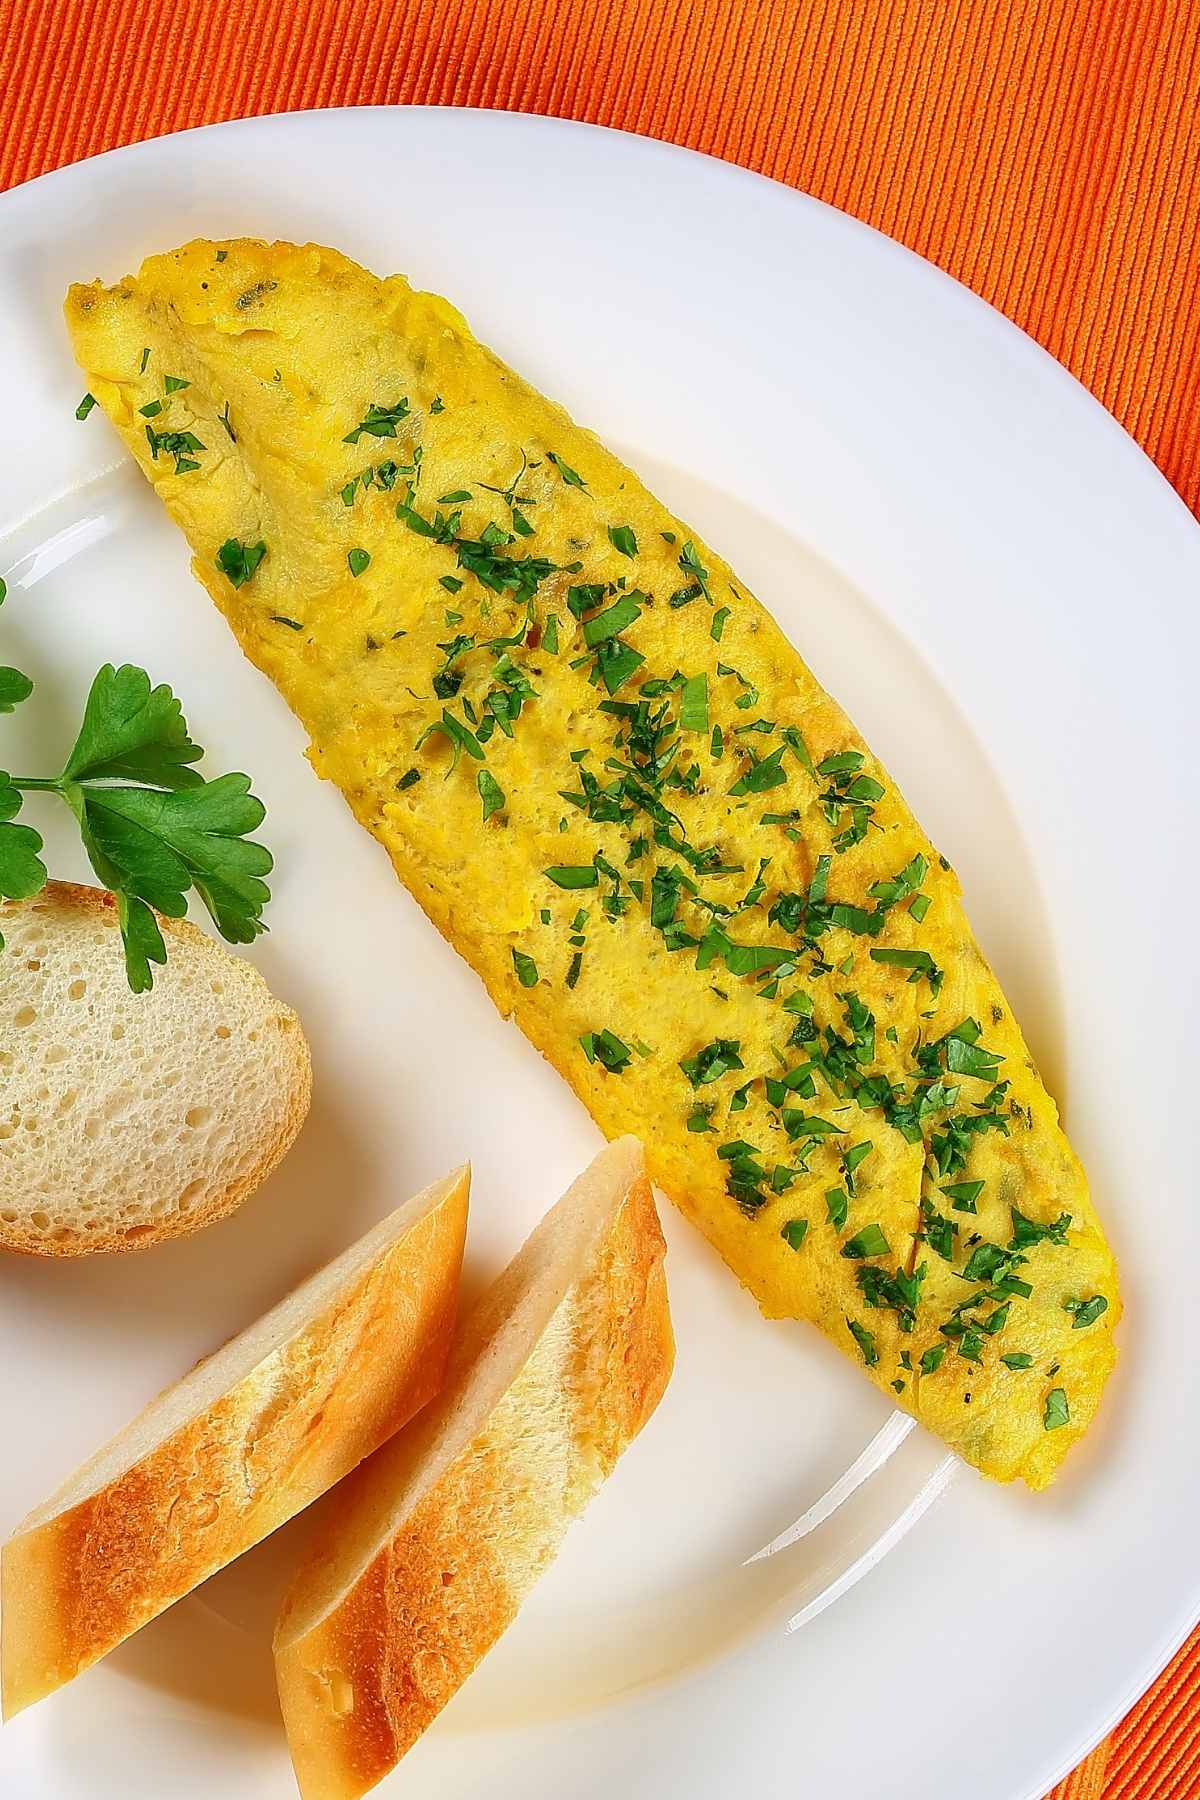 Give your breakfast that je ne sais quoi with a perfect French Omelette. It may sound fancy, but this simple recipe can be mastered by beginners, once they’ve learned the proper technique. All it takes is a bit of practice.